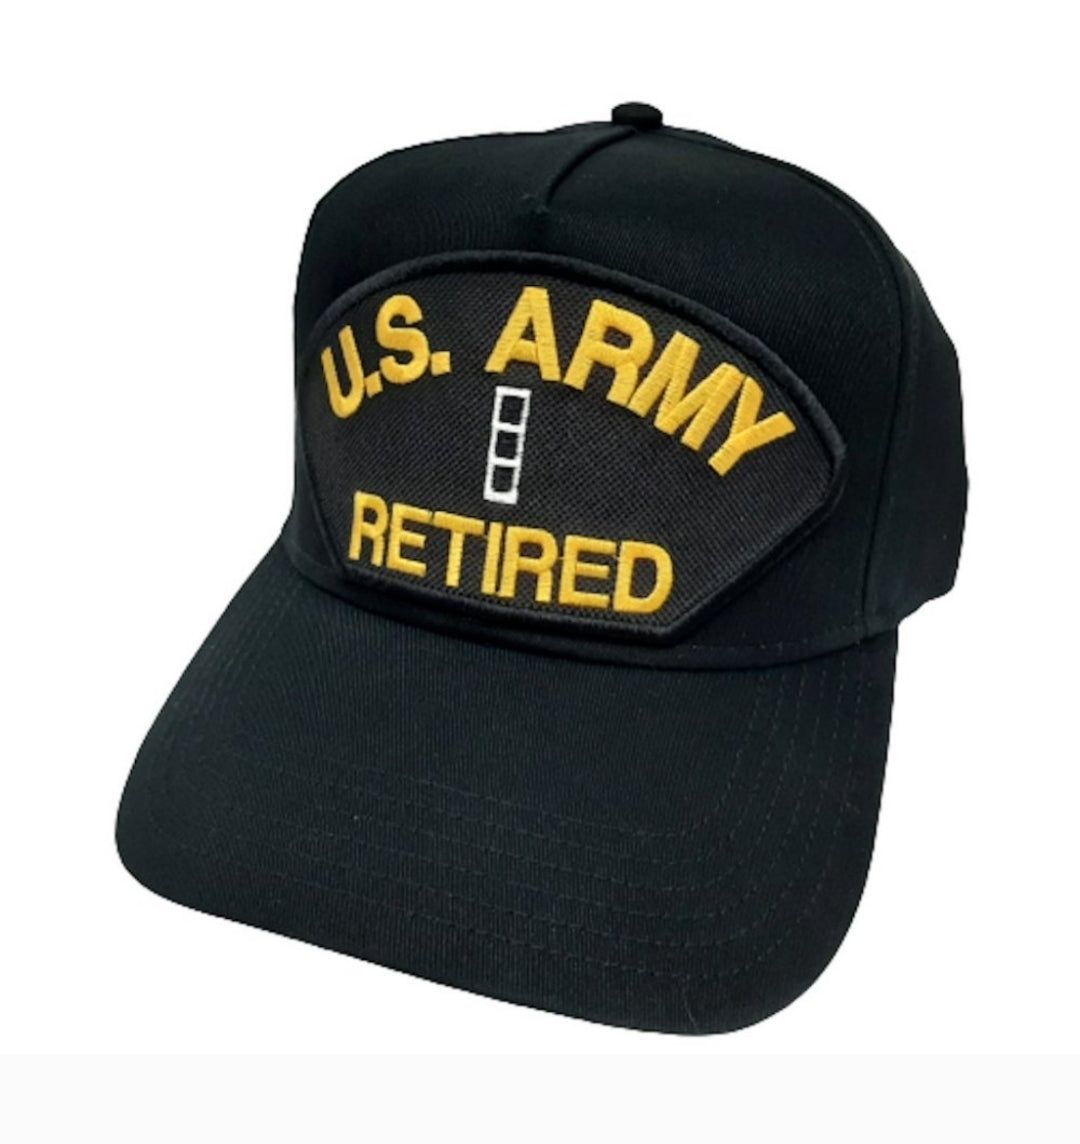 US ARMY RETIRED CHIEF WARRANT OFFICER 3 CW3 Embroidered Hat Baseball Cap Adjustable Black